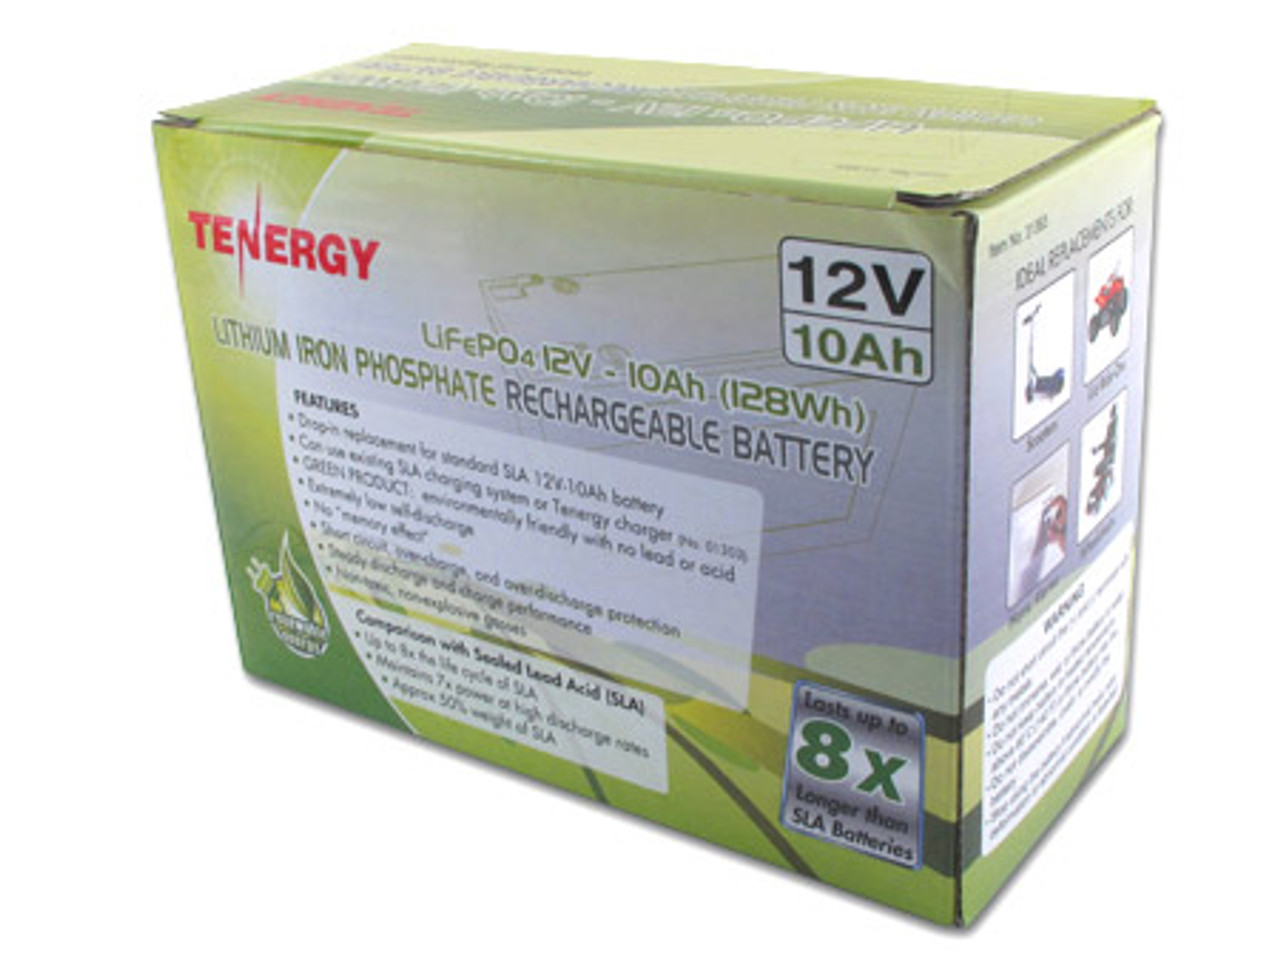 Tenergy 12.8V 10Ah LiFePO4 Rechargeable Battery (DGR-A)